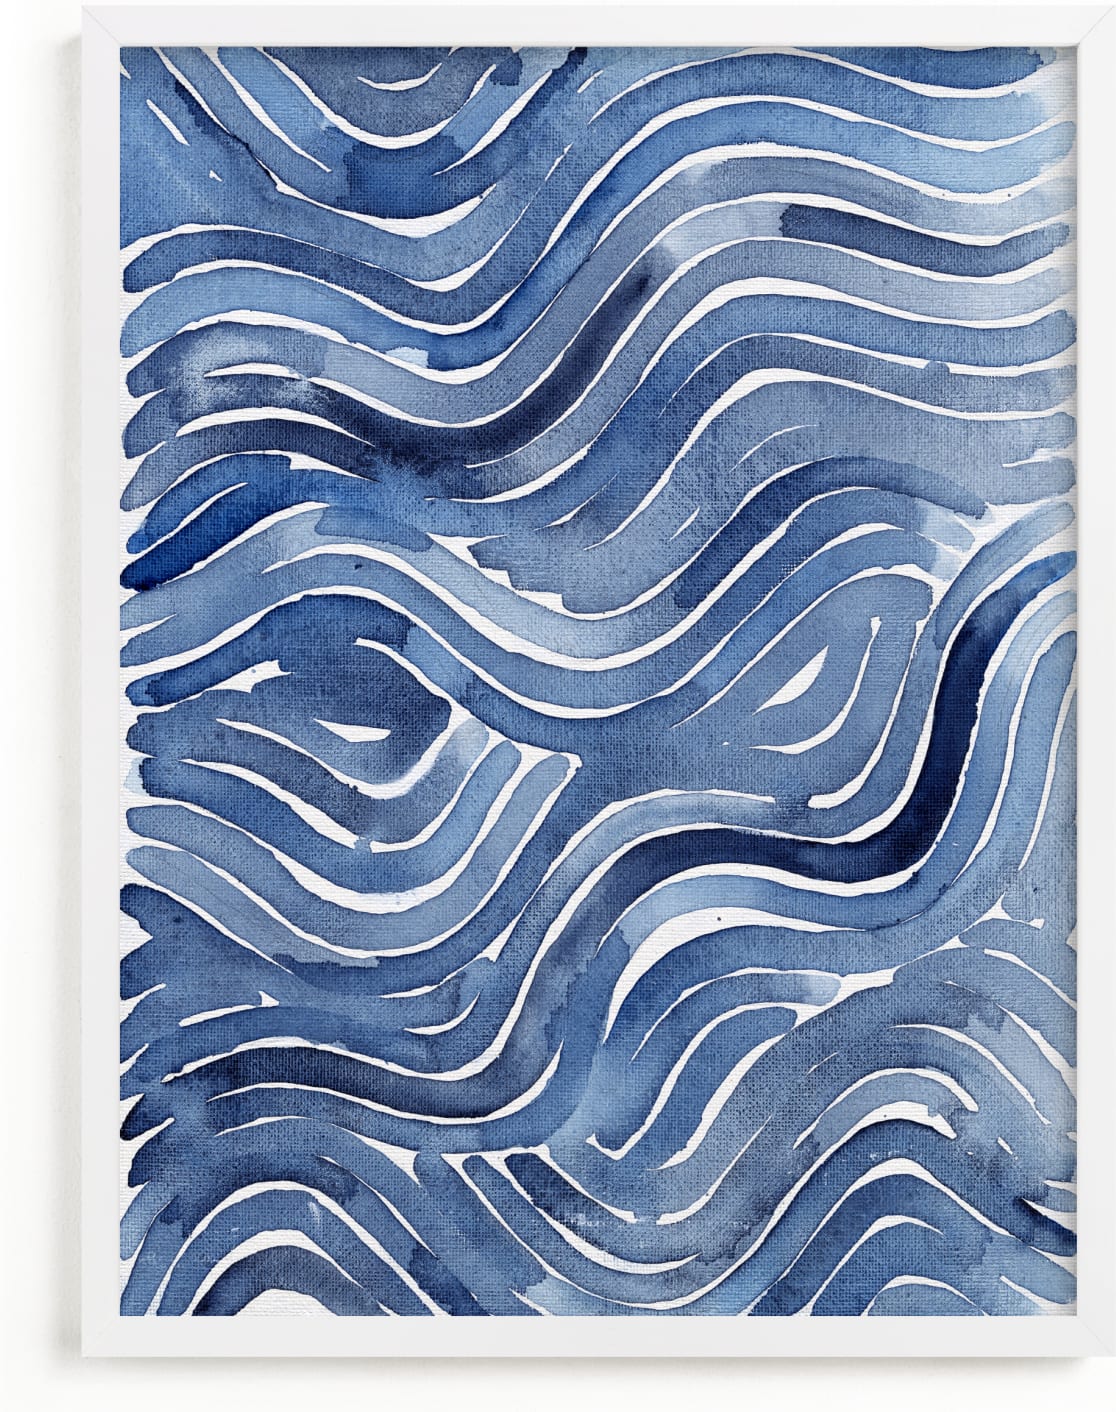 This is a blue kids wall art by Kristine Sarley called Playful Tide.